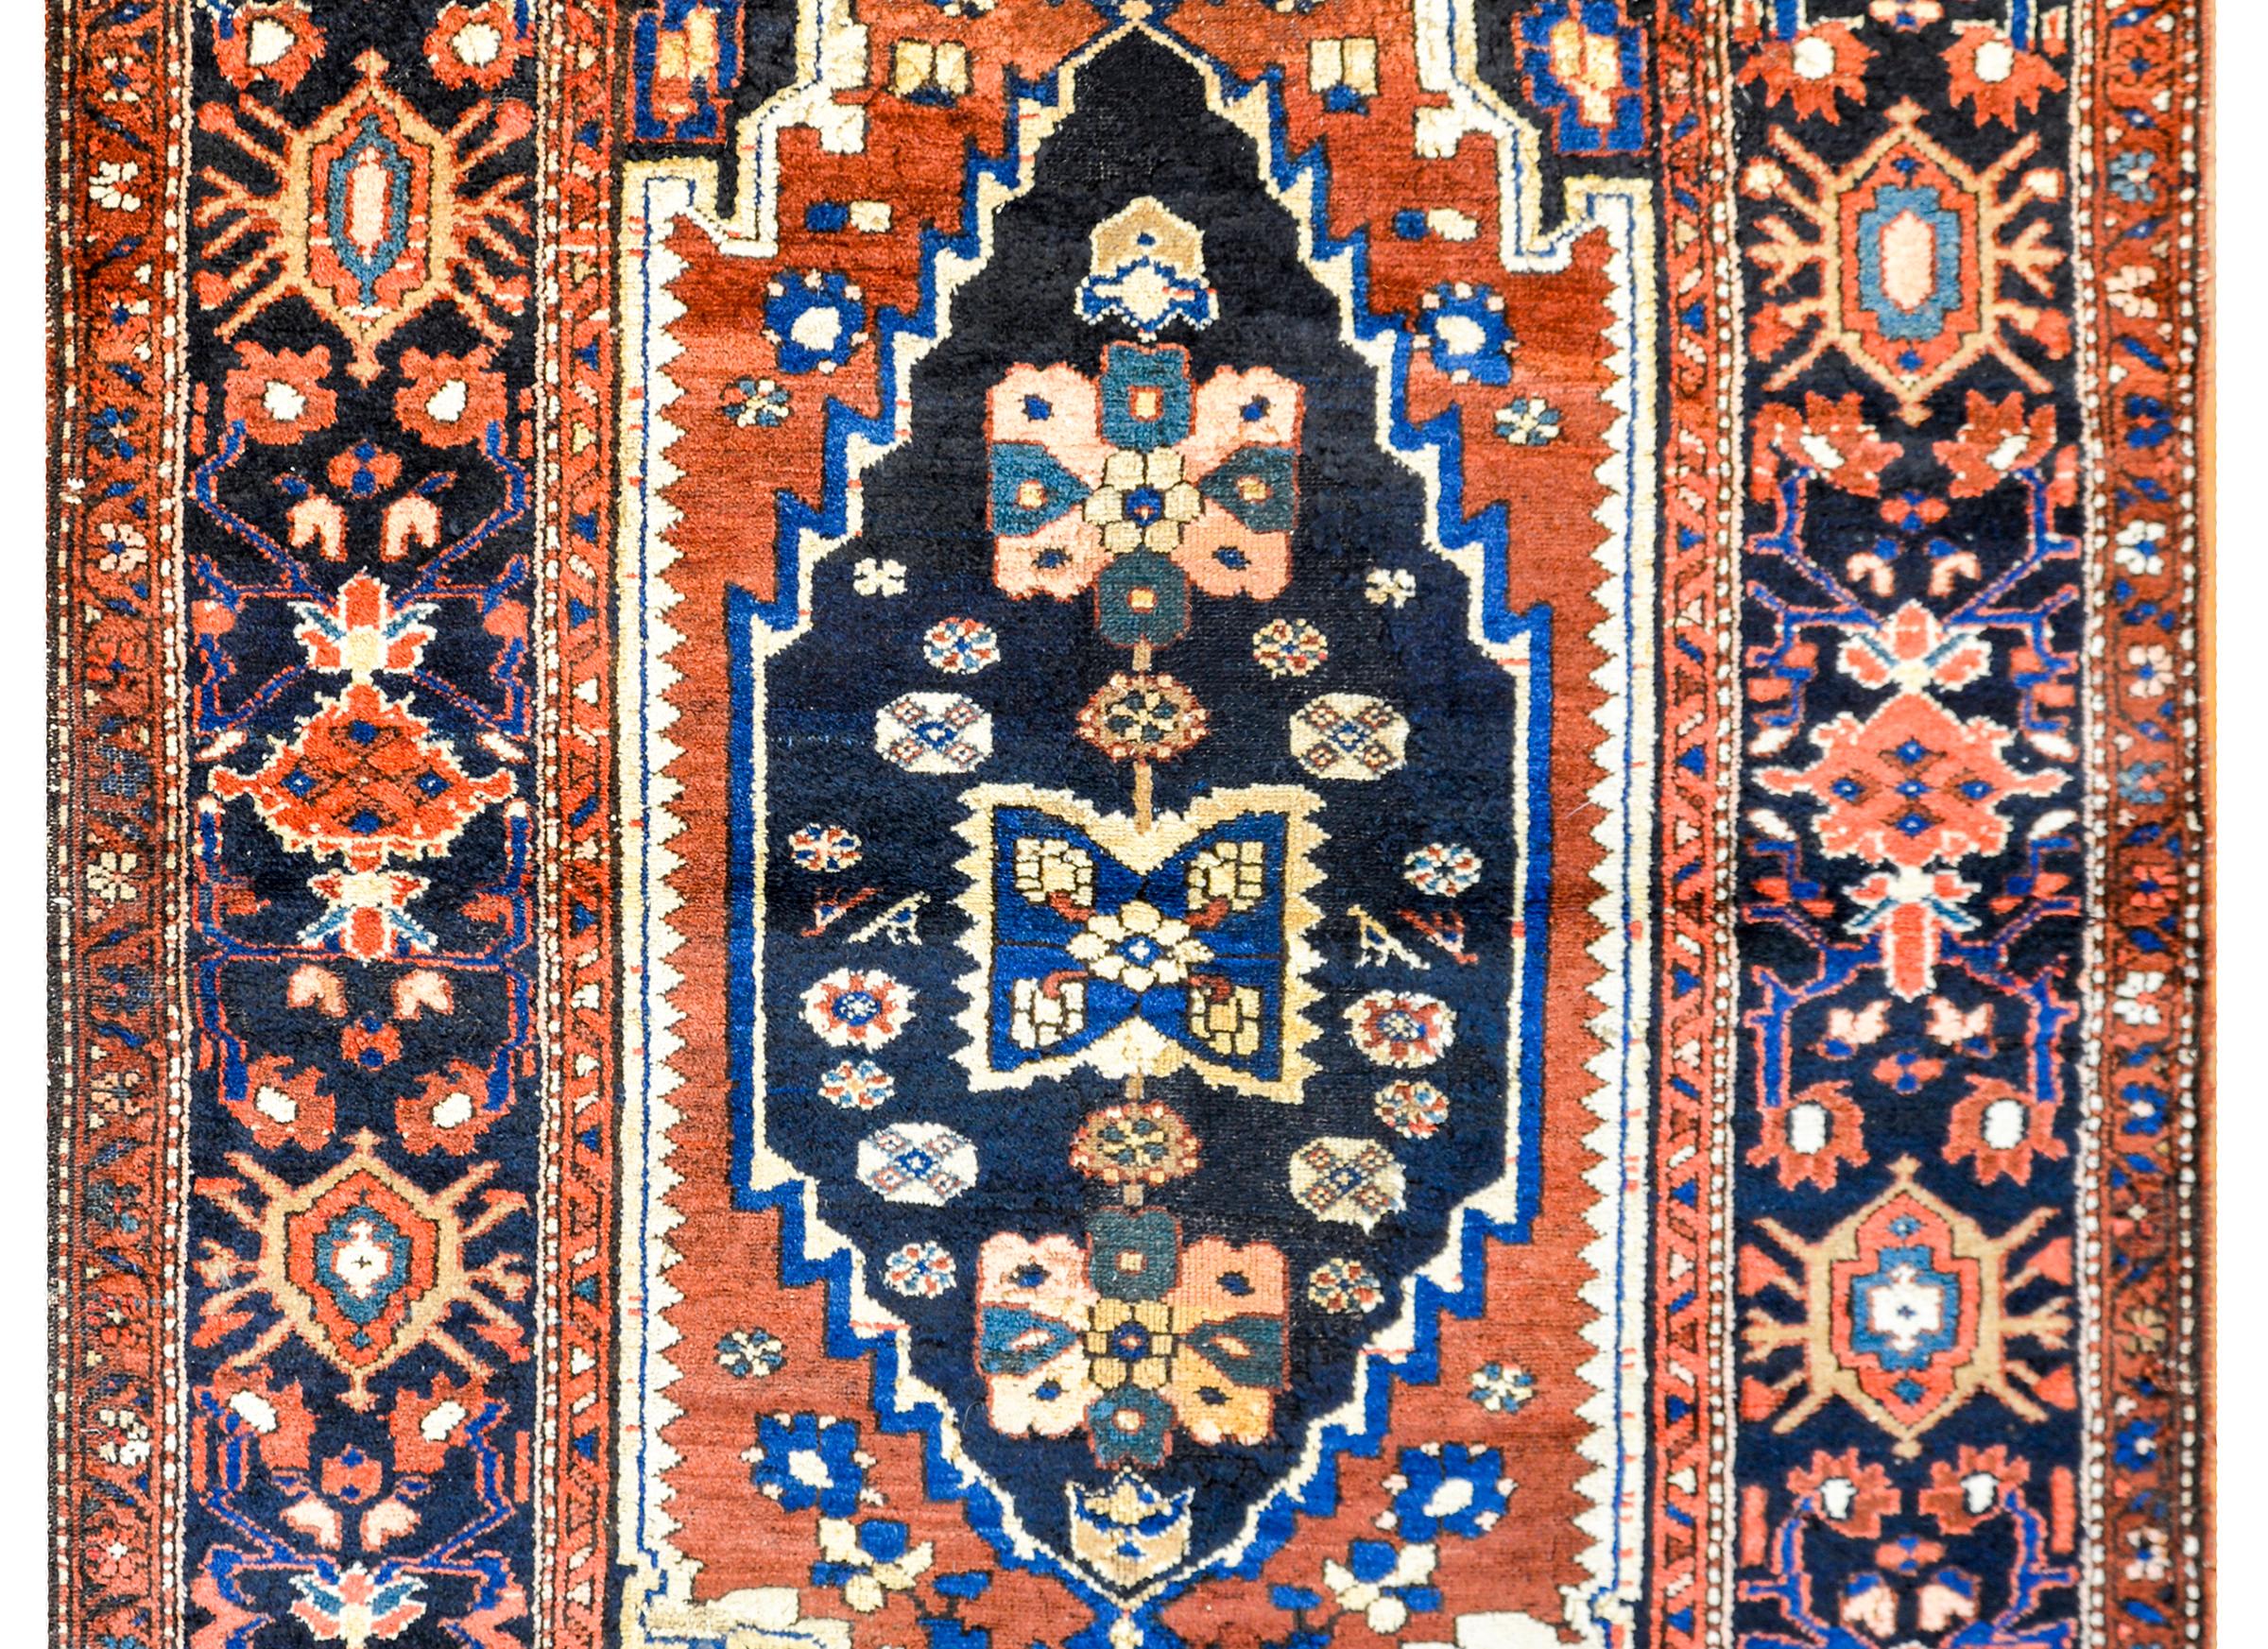 A wonderful early 20th century Persian Lori rug with a fantastic bold tribal pattern containing a large diamond medallion with several stylized floral patterns on a dark indigo background surronded by a crimson ground. The border is beautiful, with